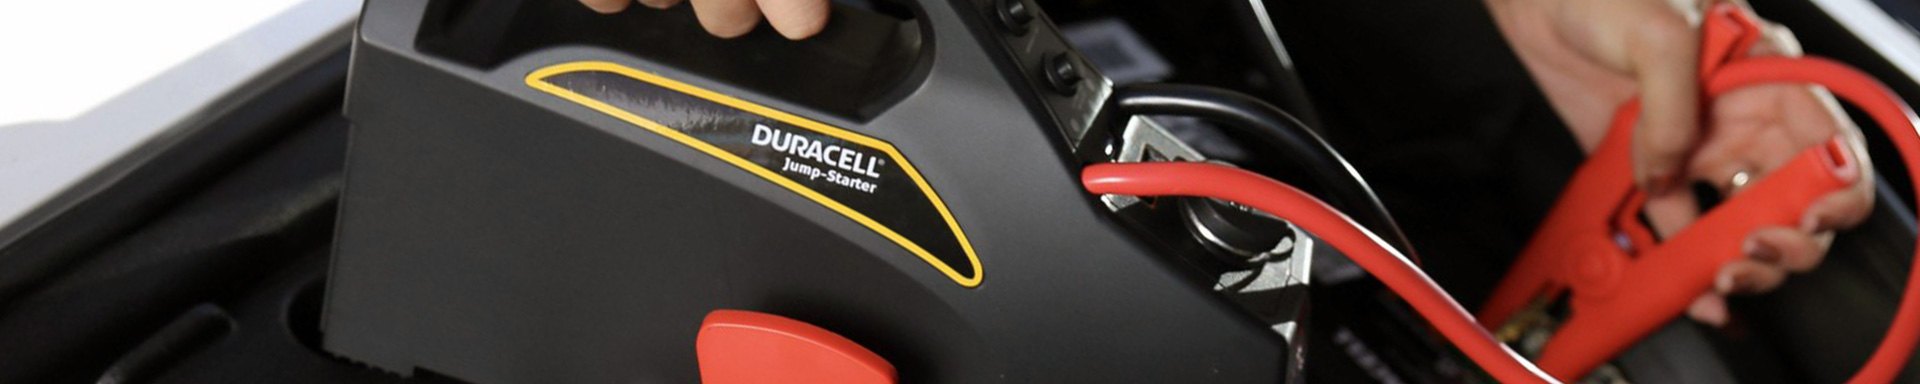 Duracell RV Converters & Inverters